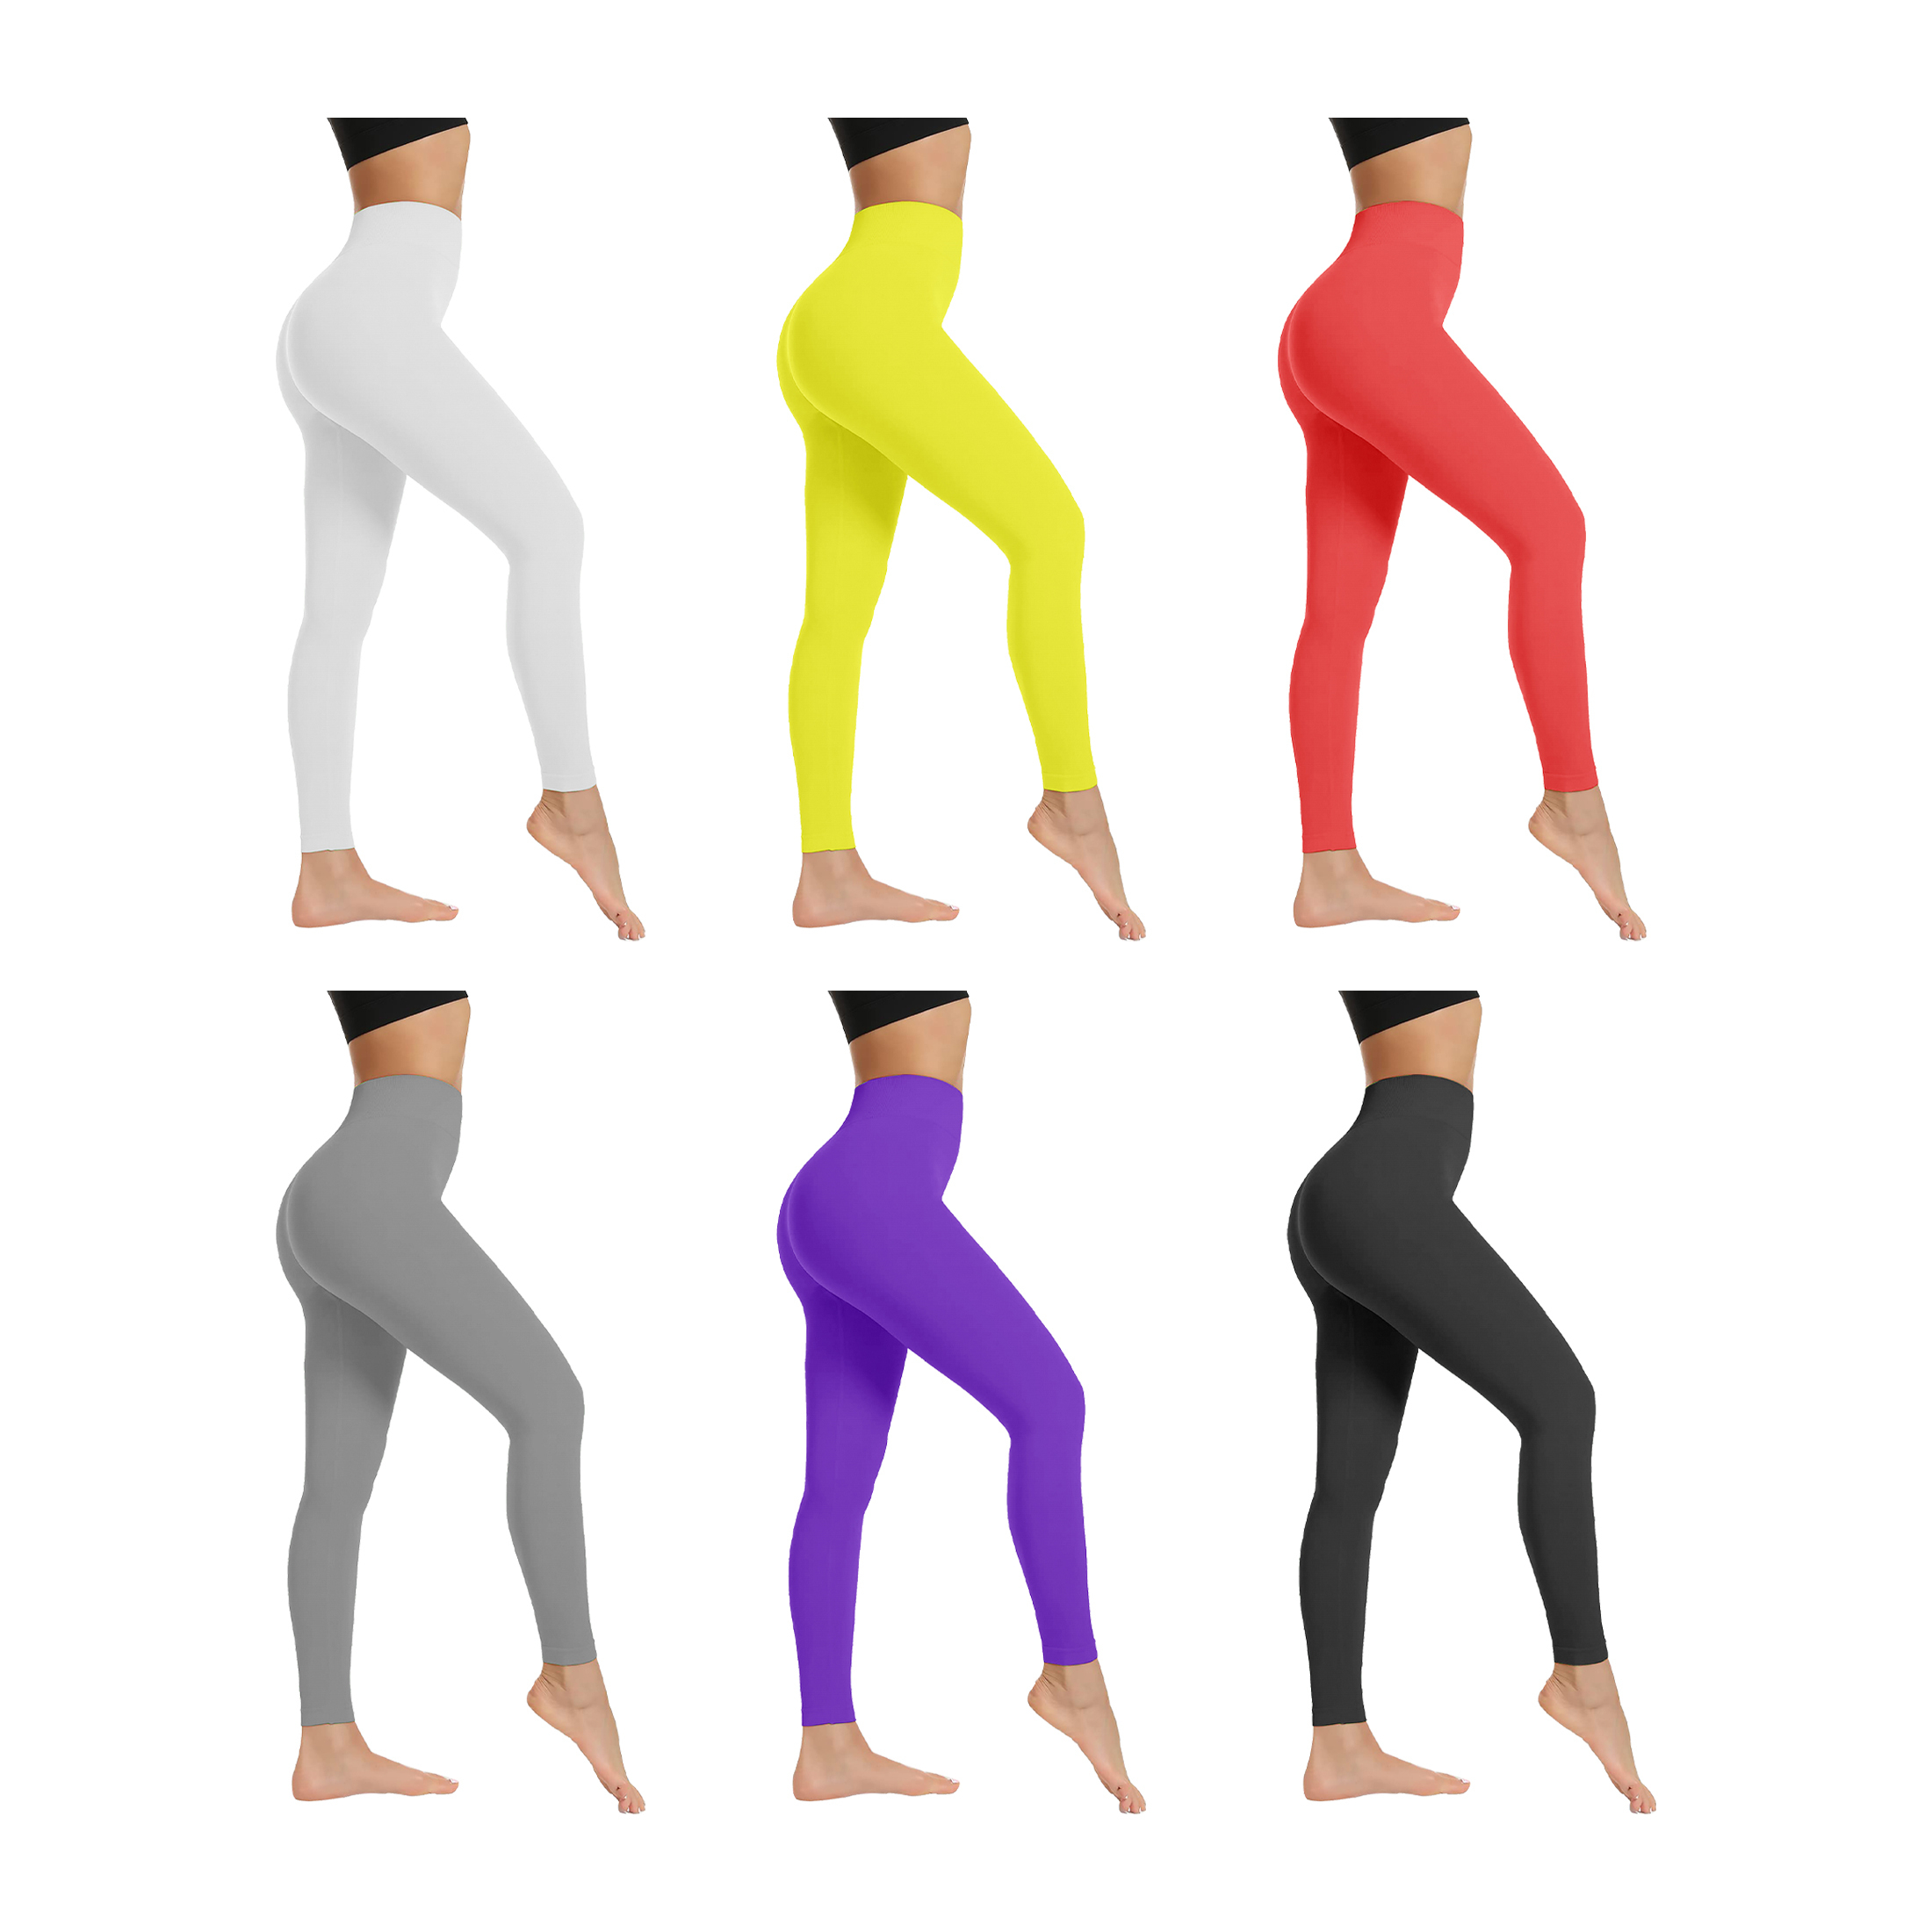 2-Pack: Women's High-Waist Ultra-Soft Stretchy Solid Fitness Yoga Leggings Pants - S